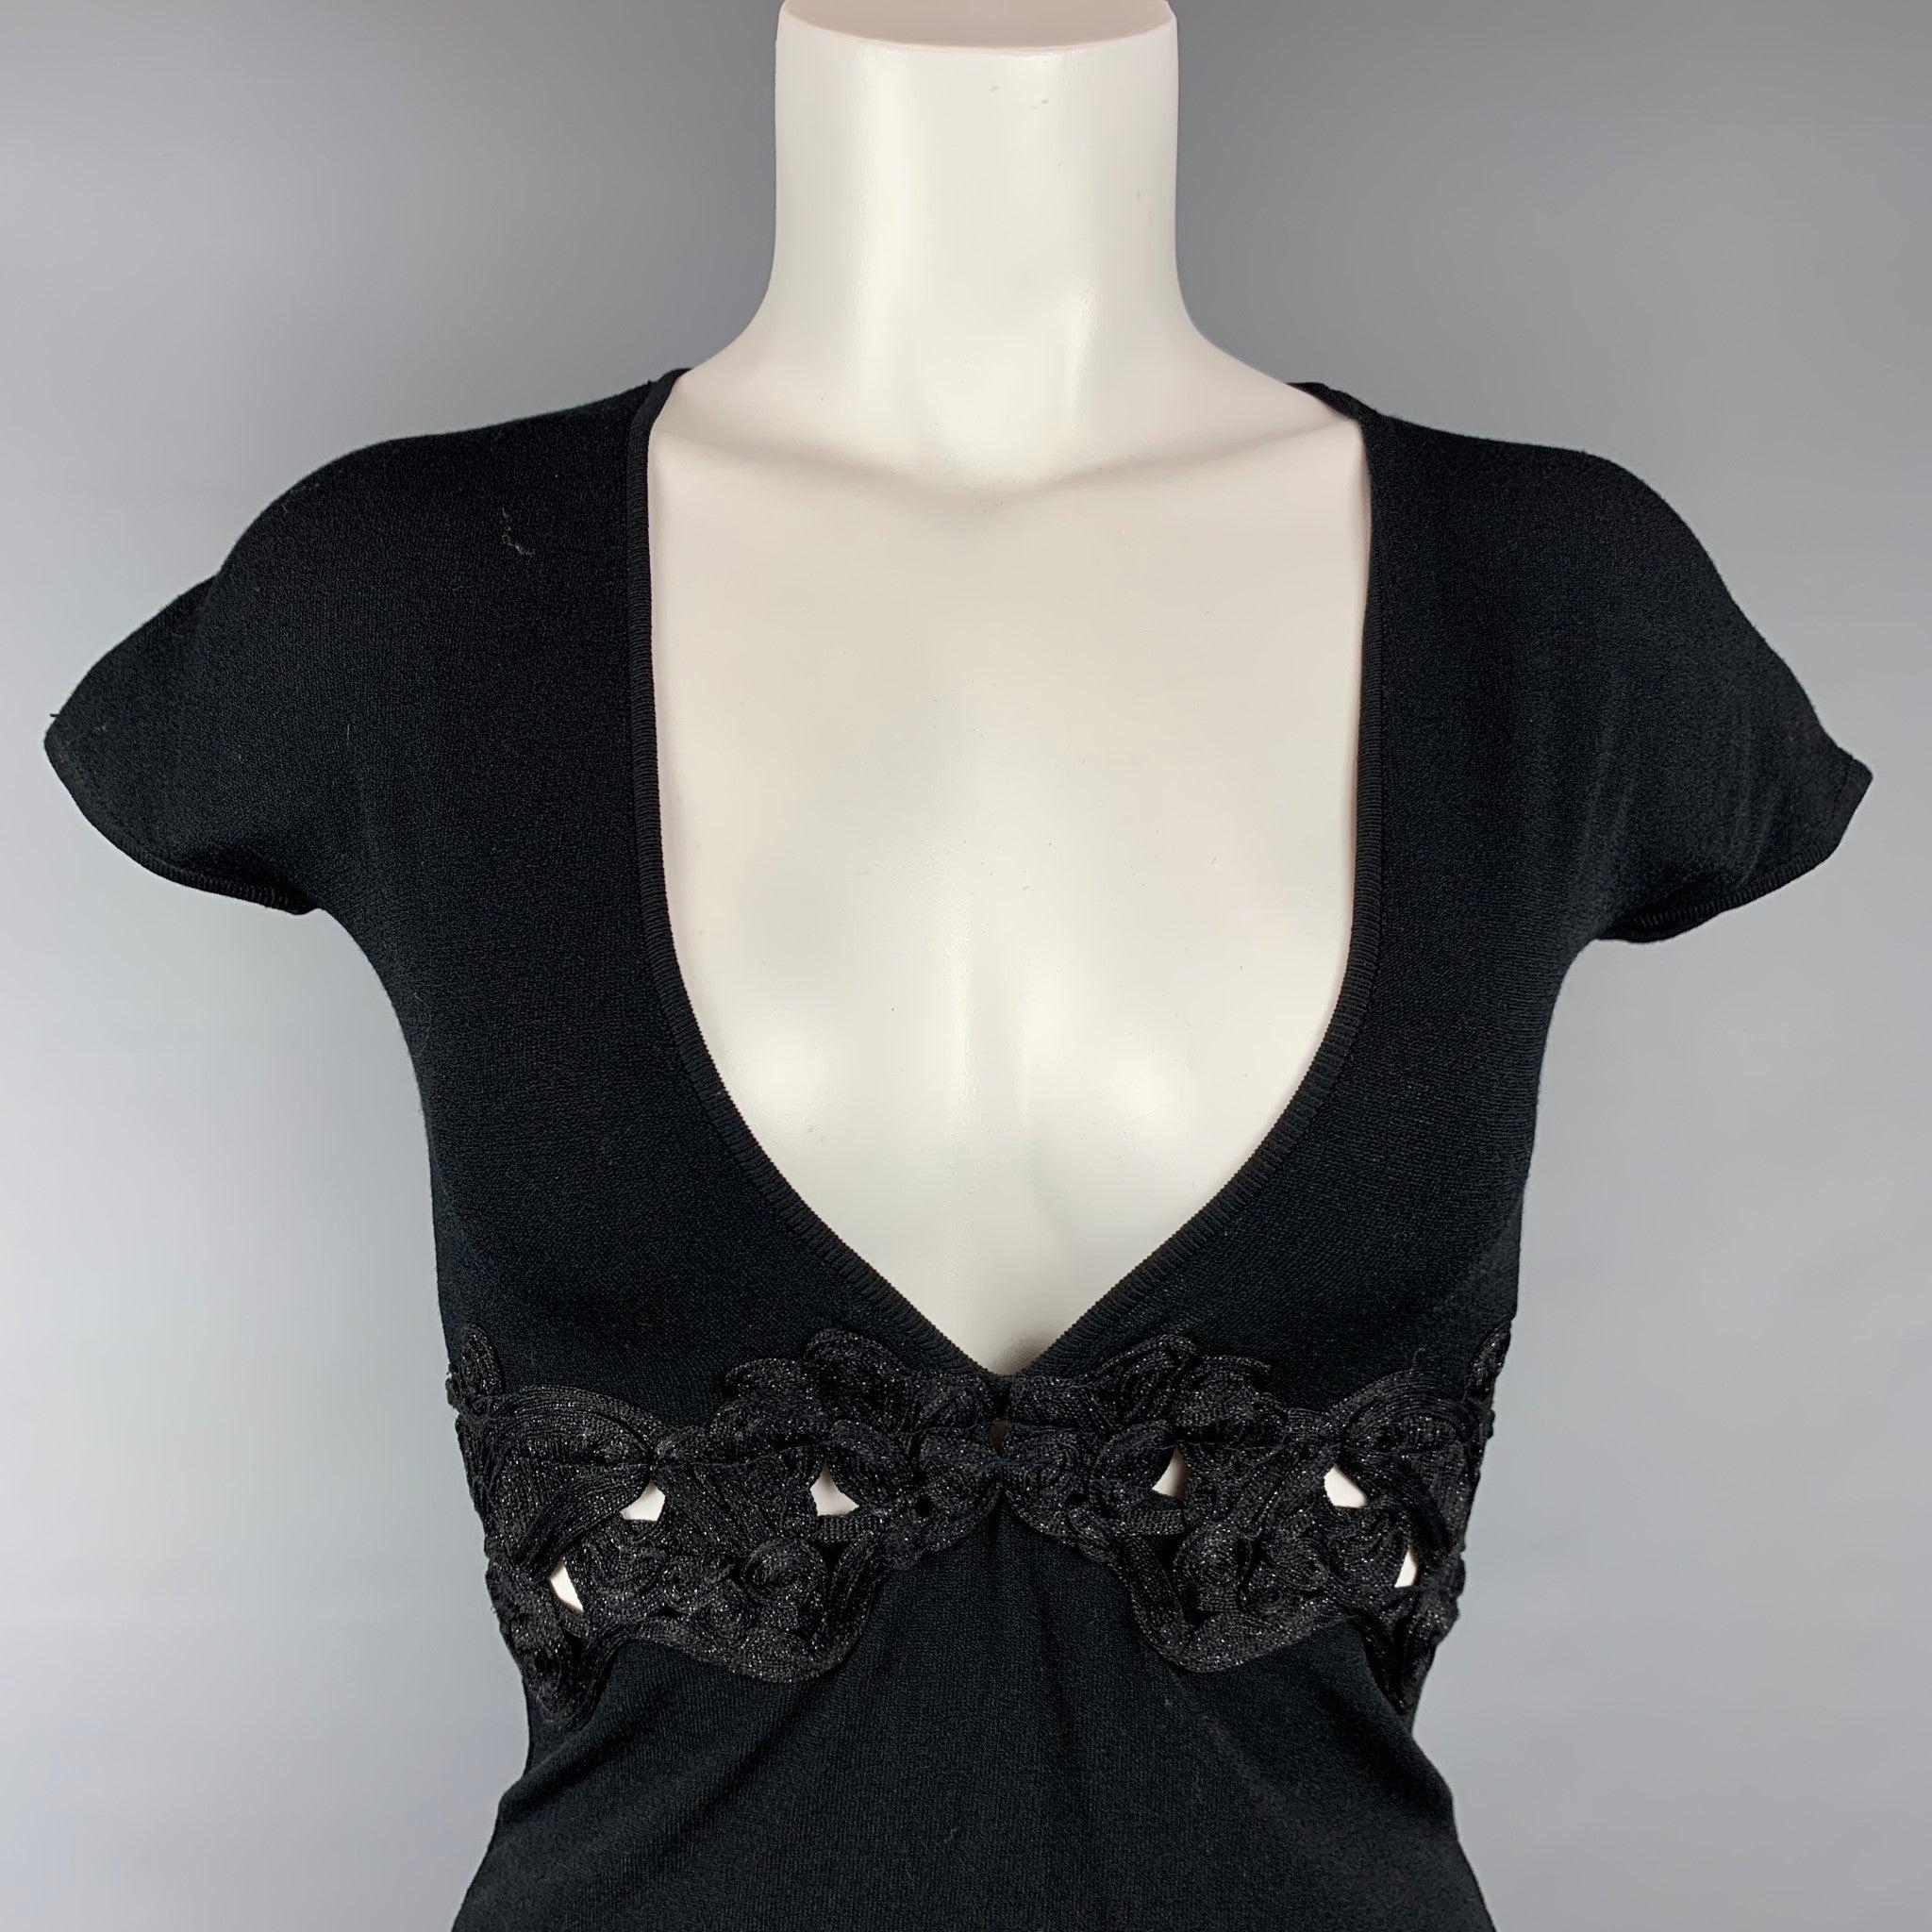 ROBERTO CAVALLI dress top comes in a black jersey viscose / polyester featuring a glitter cut out design, embellished rhinestone detail, and a v-neck. Made in Italy.Very Good Pre-Owned Condition. Minor wear on back.  

Marked:   40 

Measurements: 
